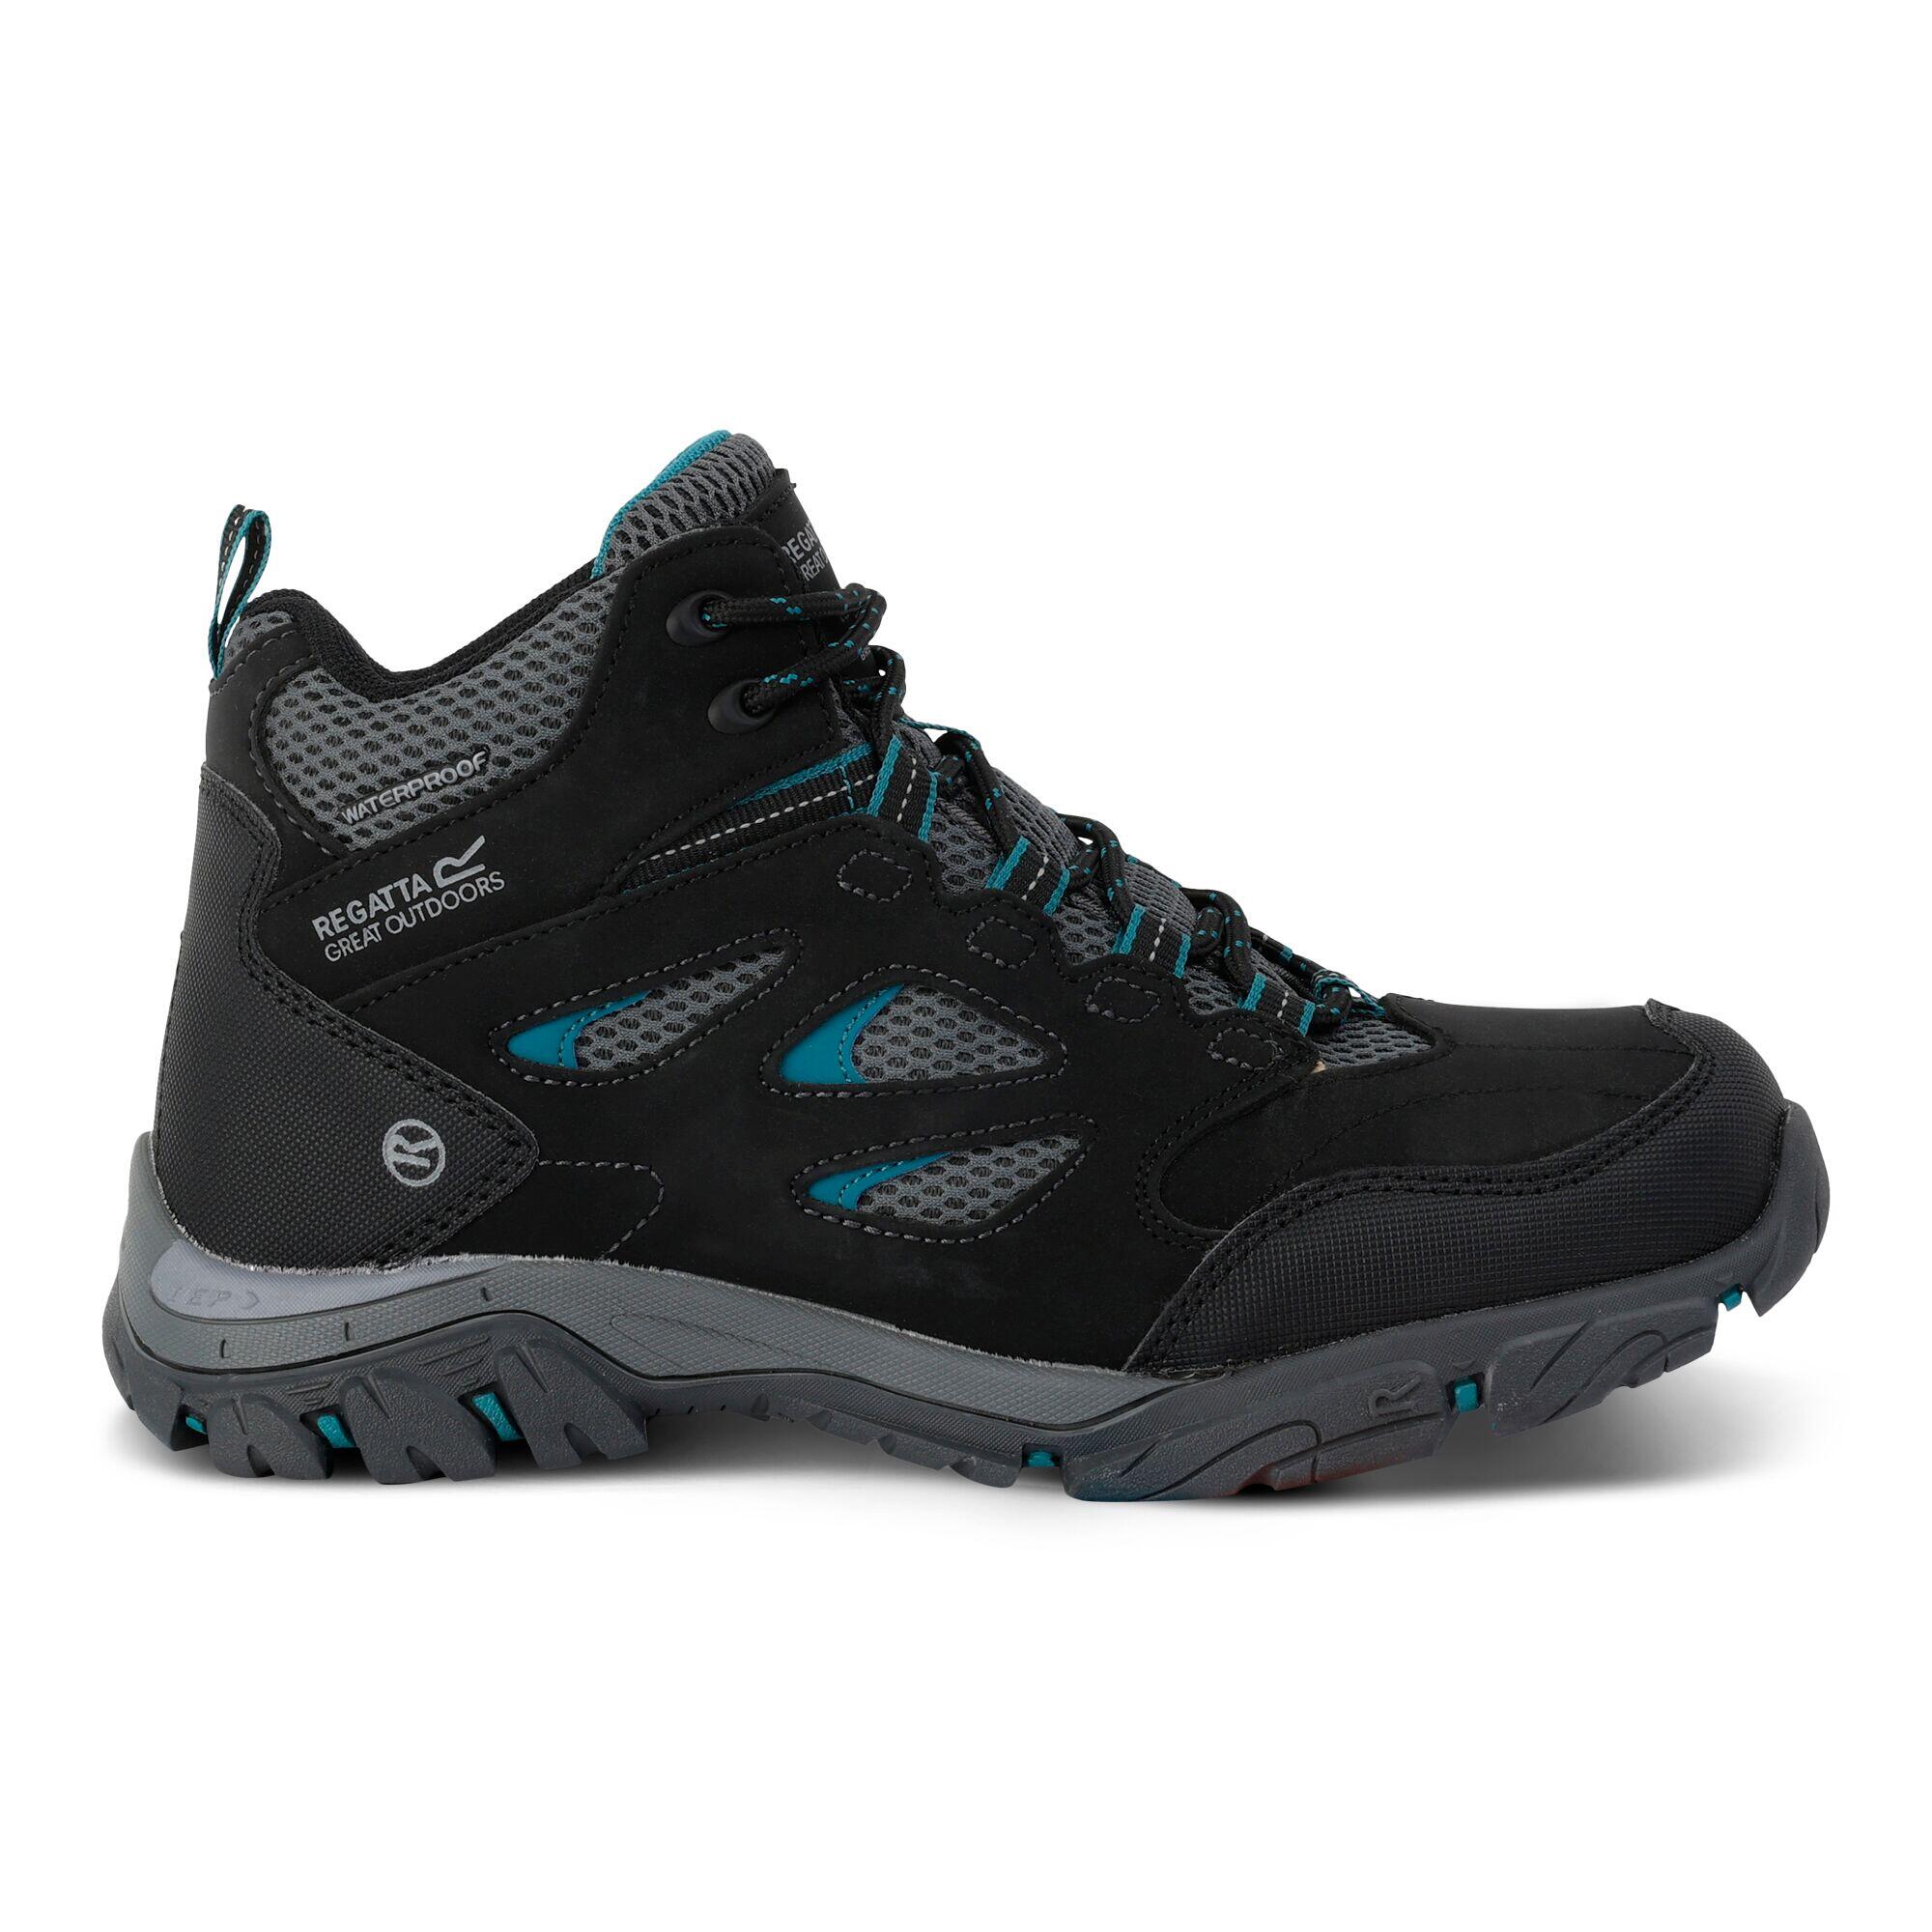 Lady Holcombe IEP Mid Women's Hiking Boots - Black / Blue 1/5